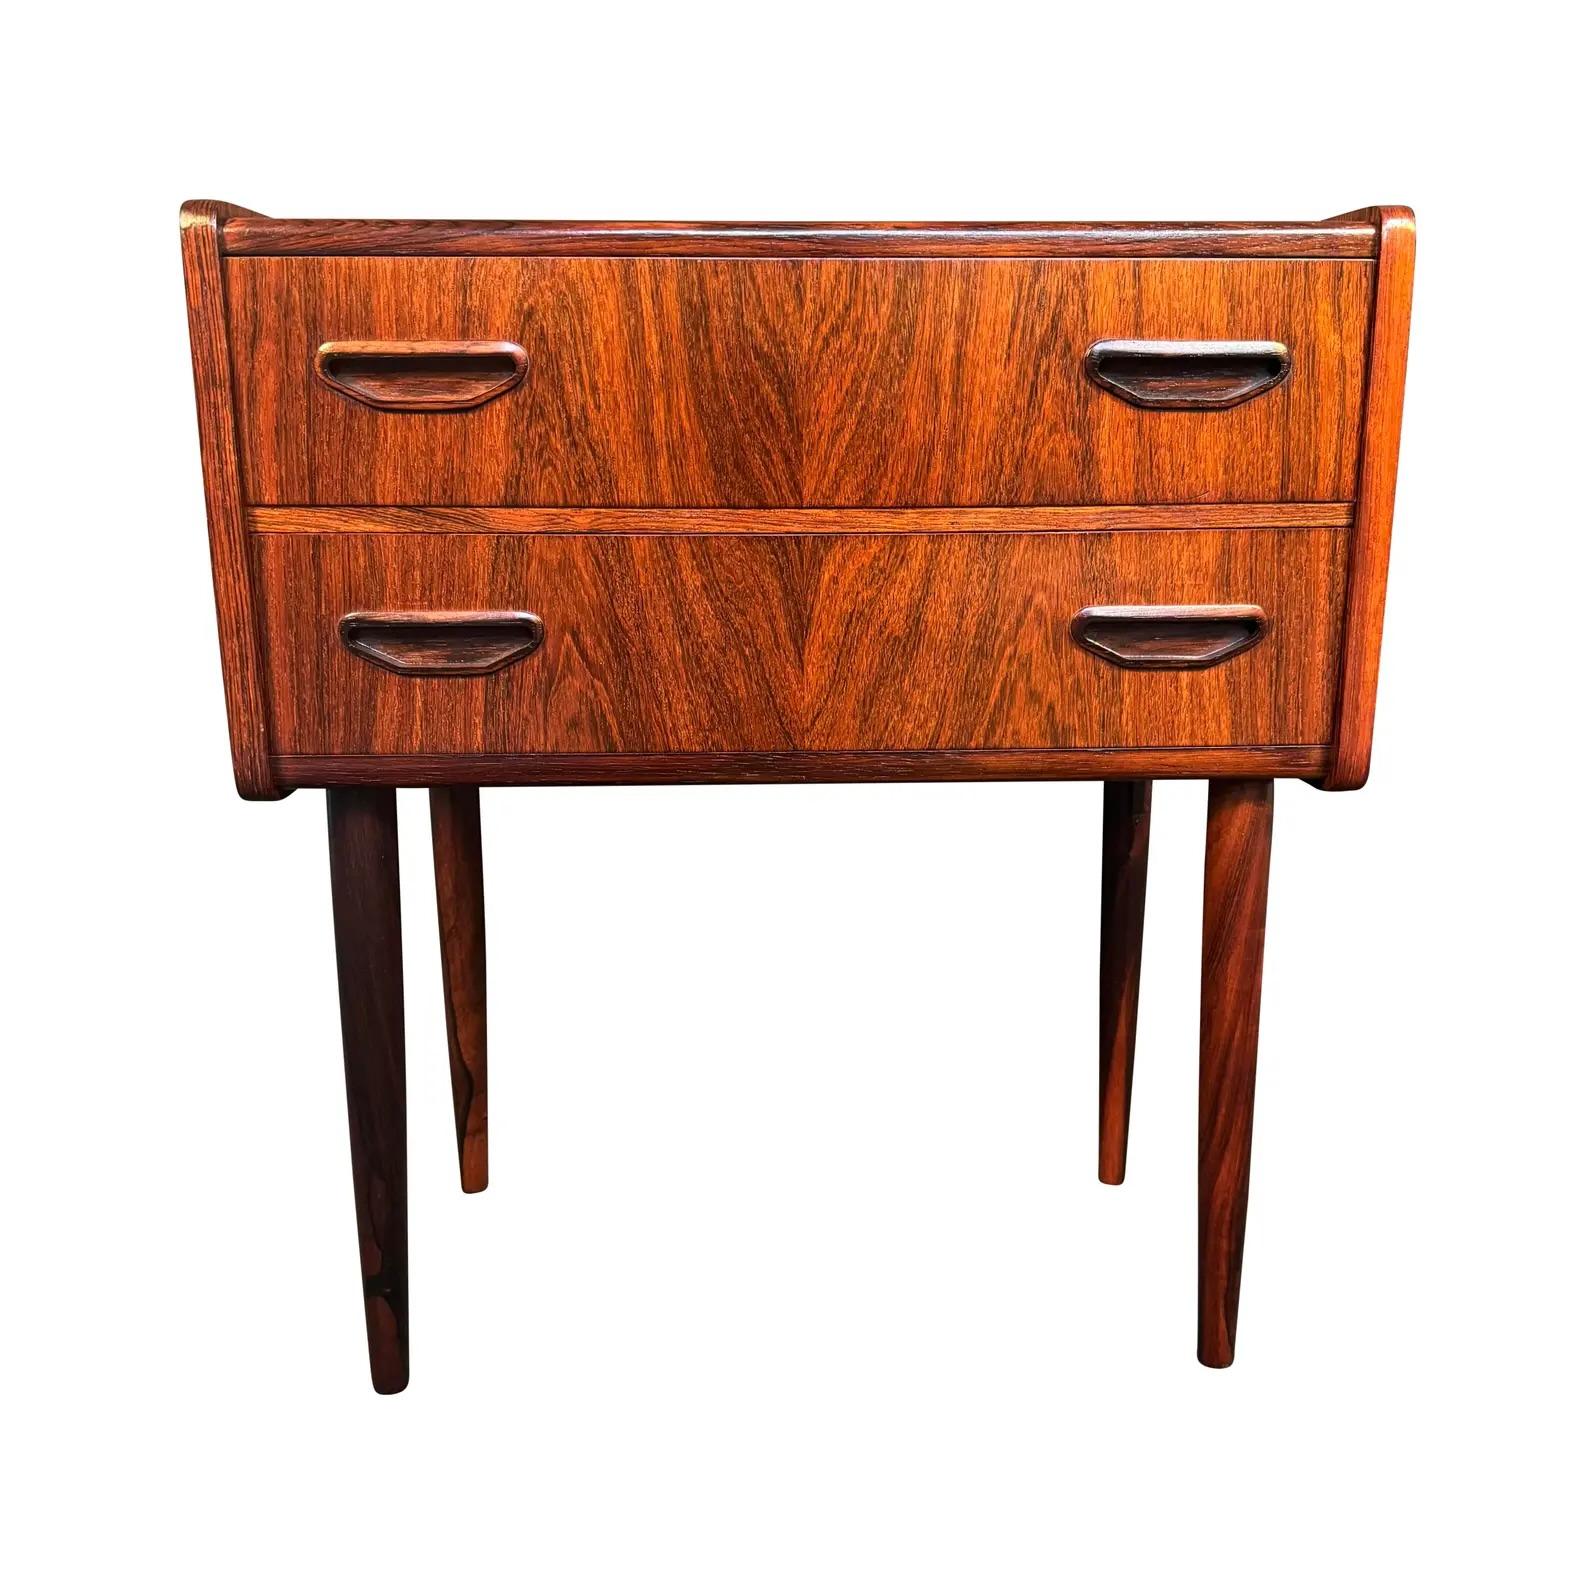 Here is a beautiful scandinavian modern rosewood entry chest in rosewood manufactured in Denmark in the 1960's.
This lovely case piece, recently imported from Europe top California before its refinishing, features a vibrant wood grain, two dove tail